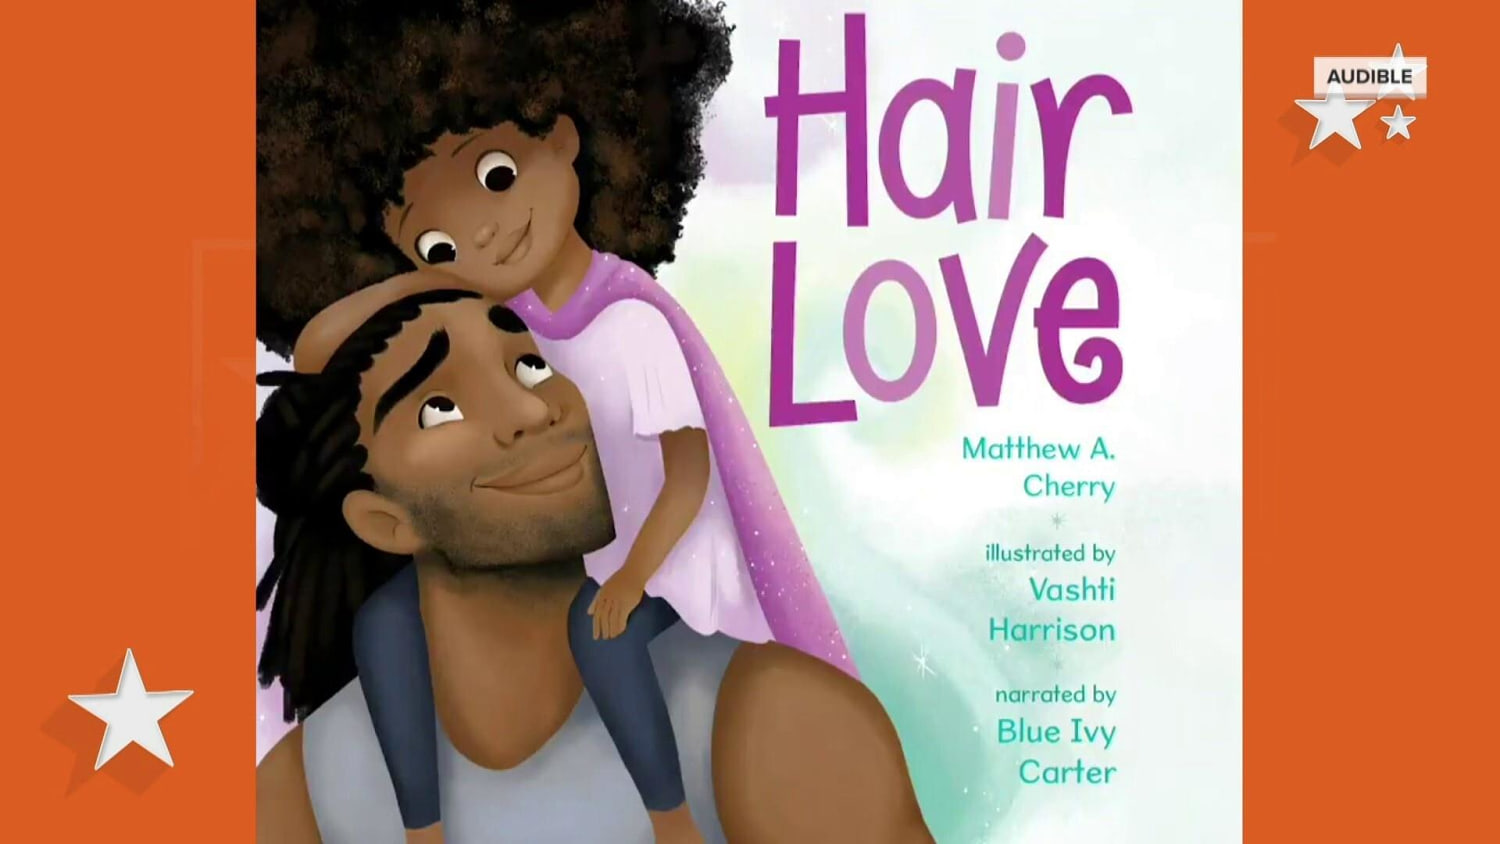 Beyonce's daughter Blue Ivy will narrate audiobook of 'Hair Love